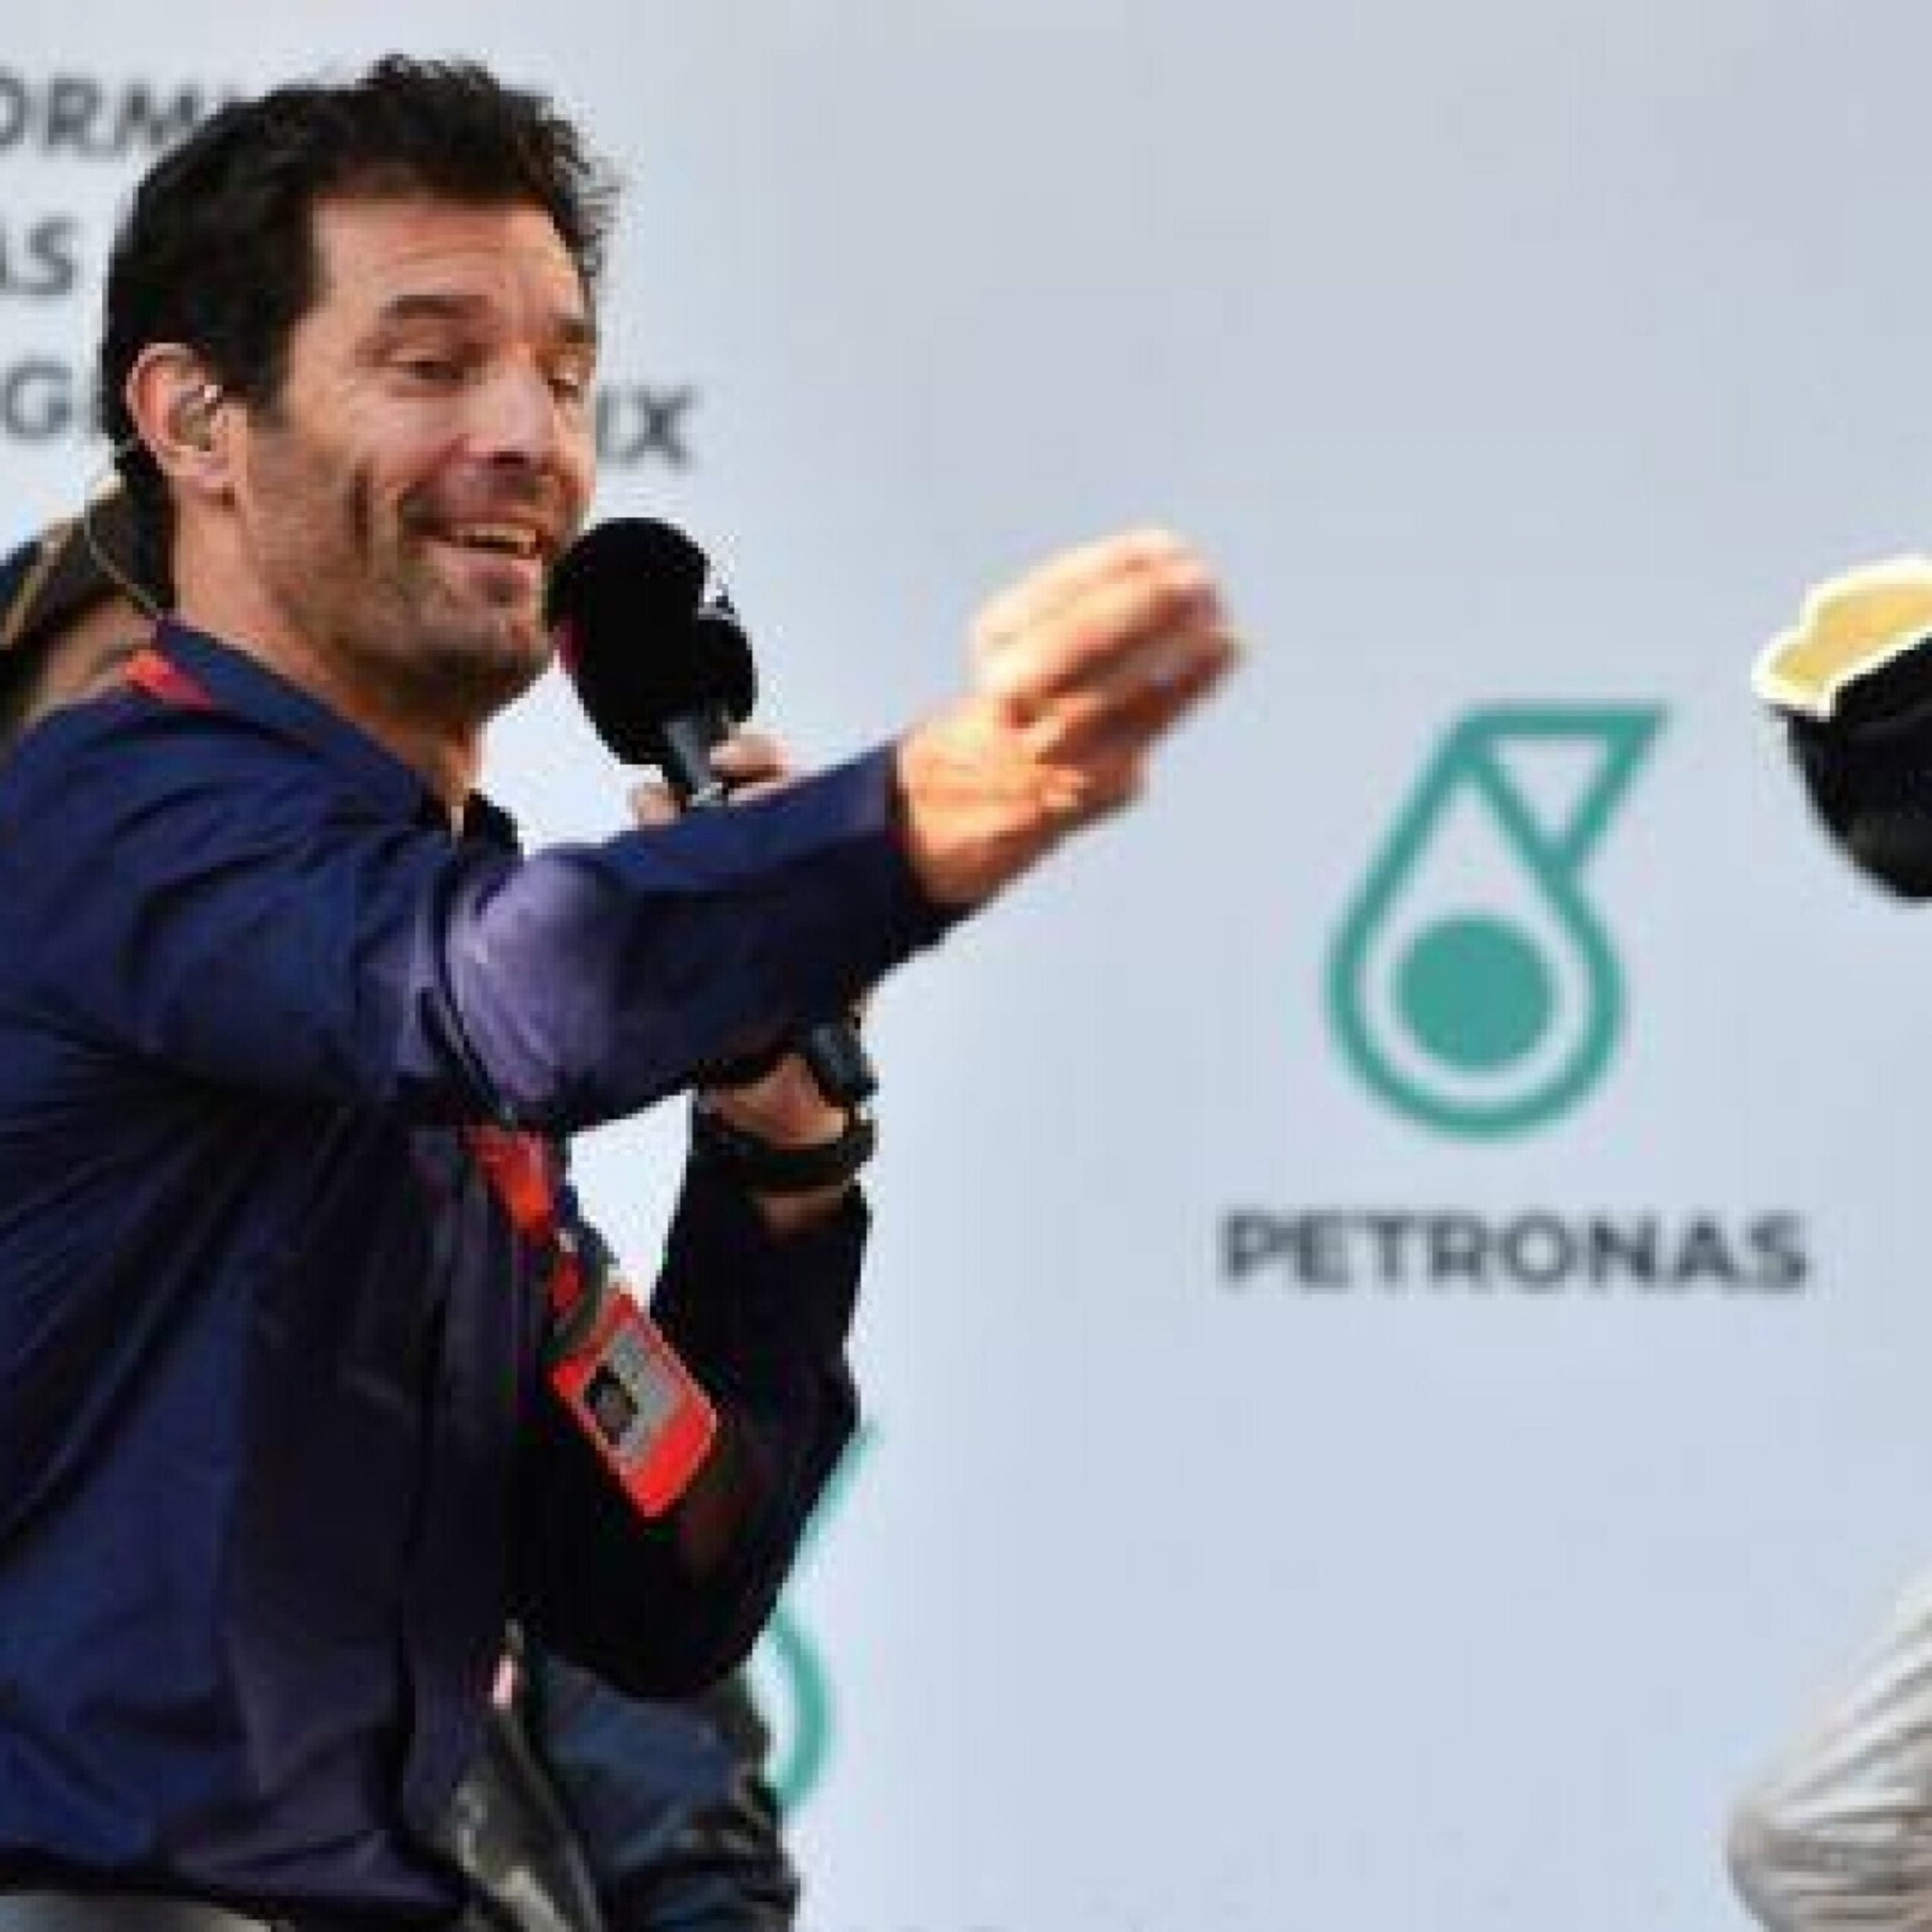 And That's How The FIA Avoided The Shoey On The Podium